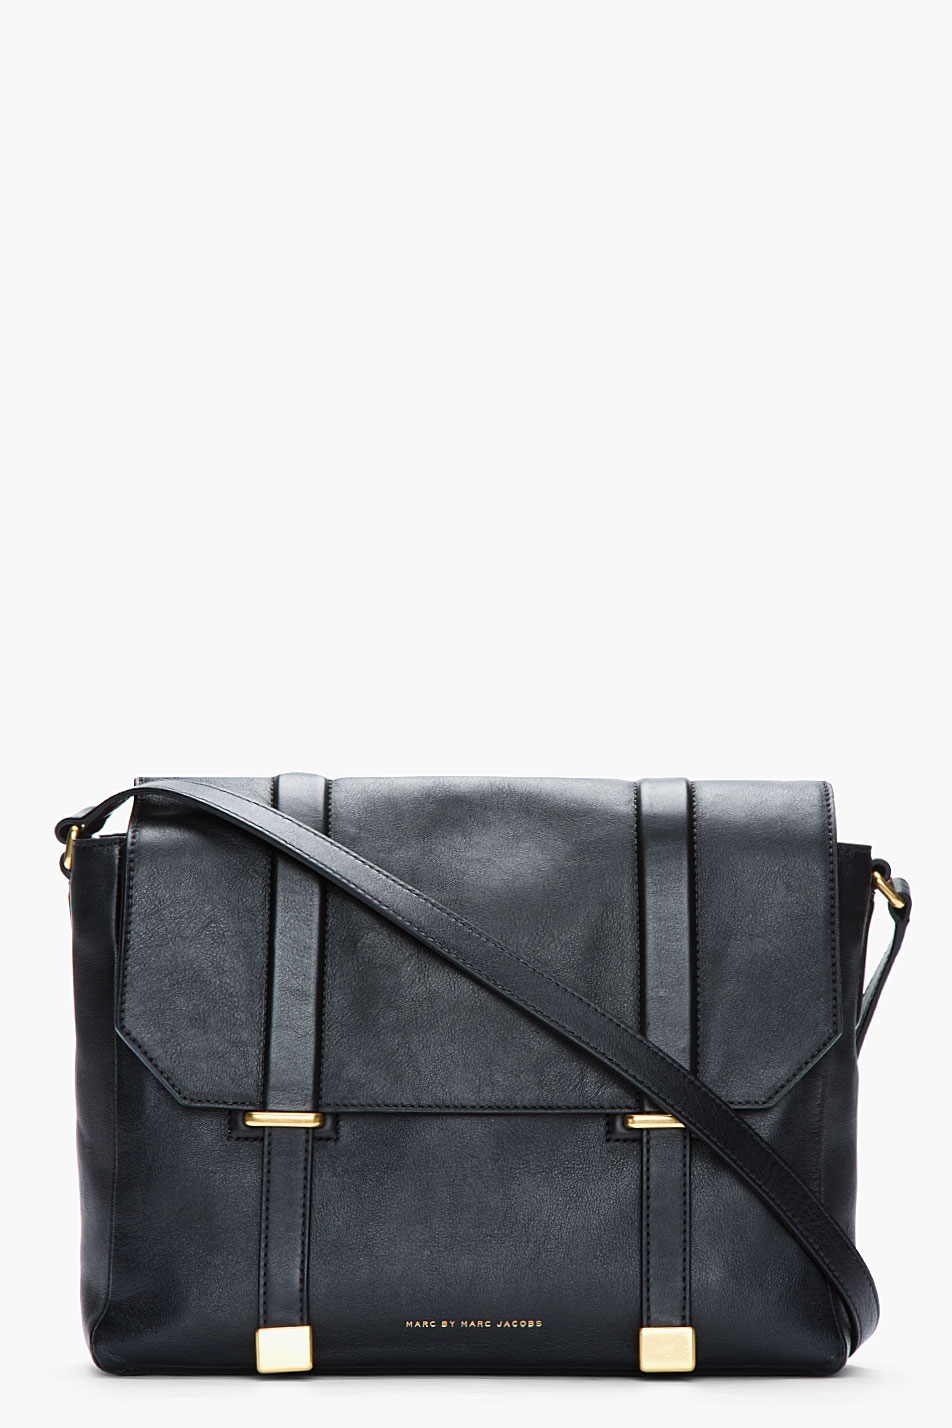 Lyst - Marc By Marc Jacobs Black Buffed Leather Messenger Bag in Black ...